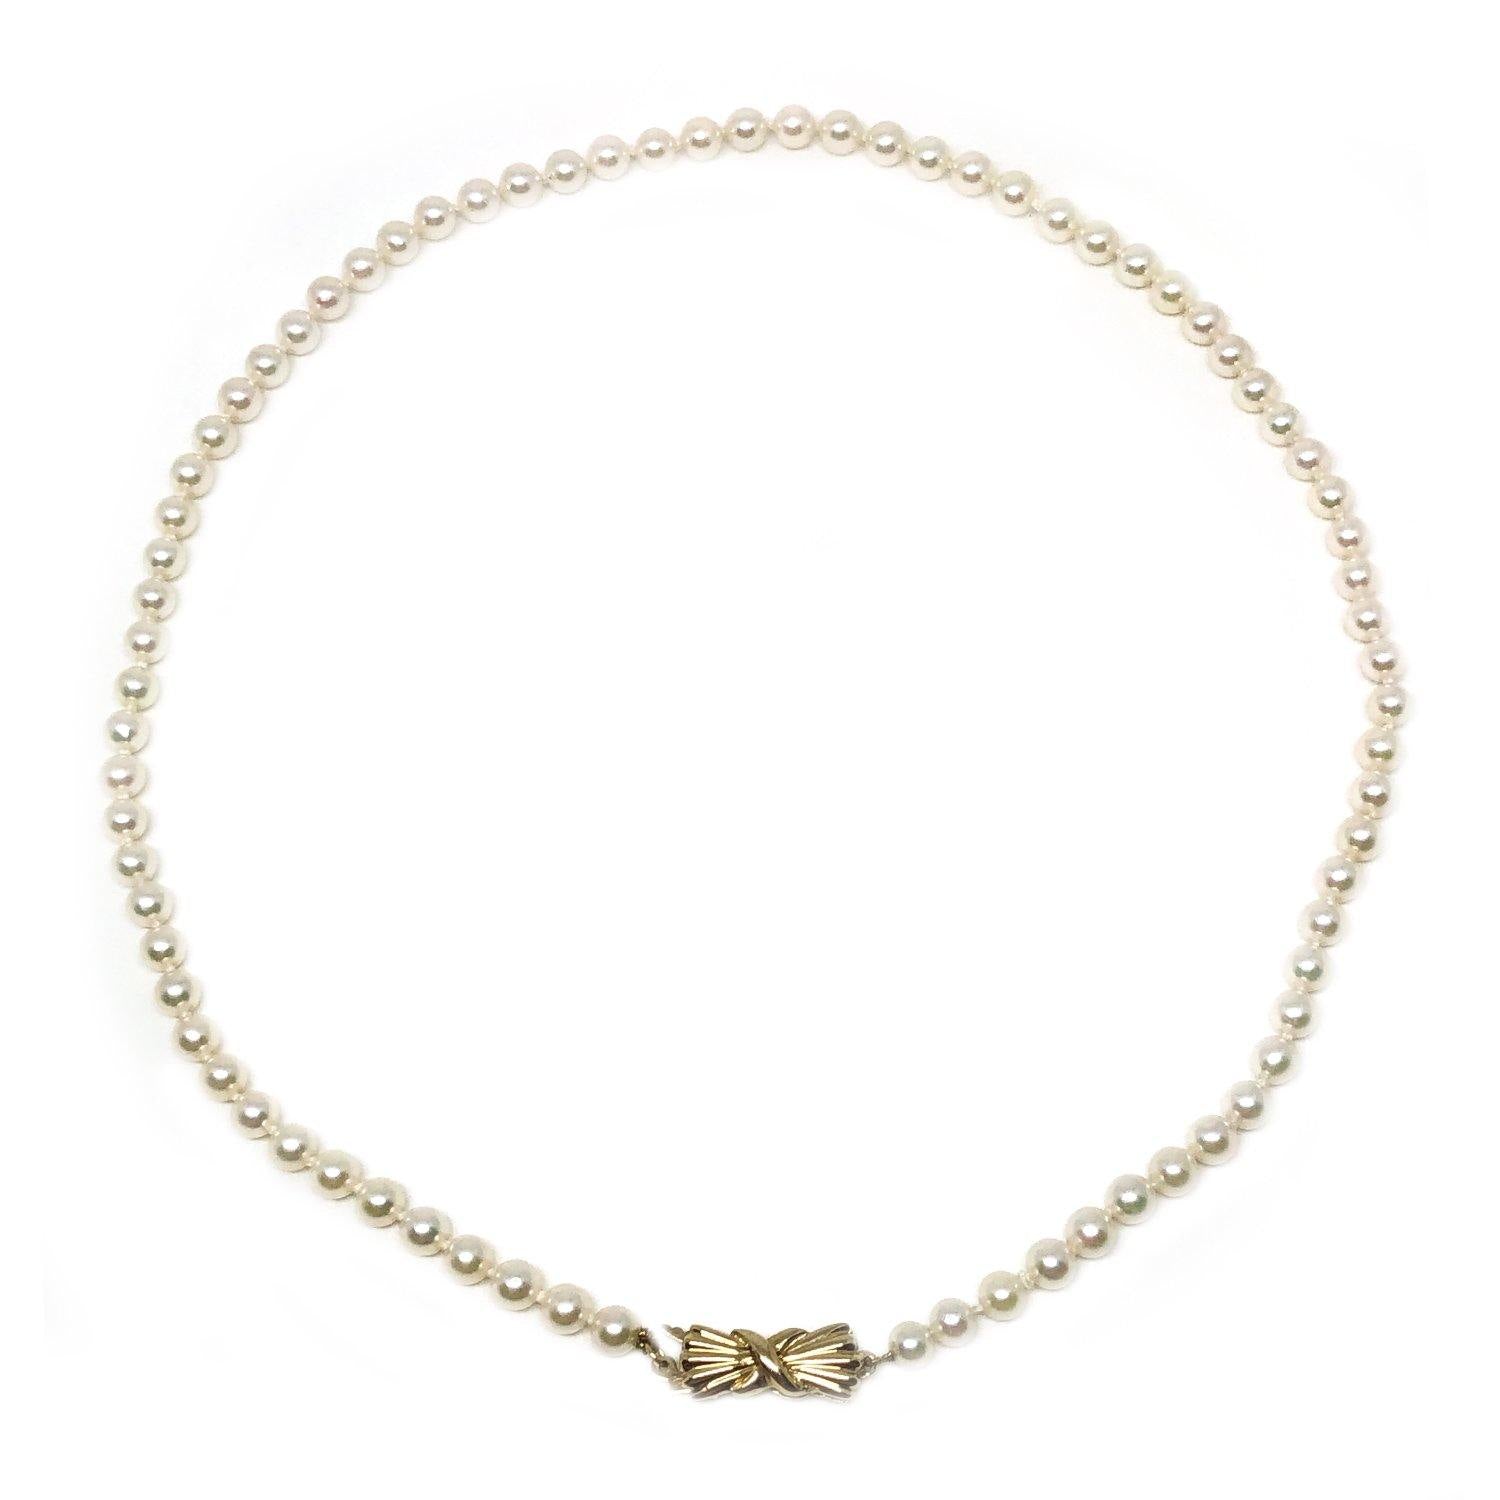 Petite Bow Japanese Saltwater Cultured Akoya Pearl Strand - 14K Yellow Gold 16.50 Inch